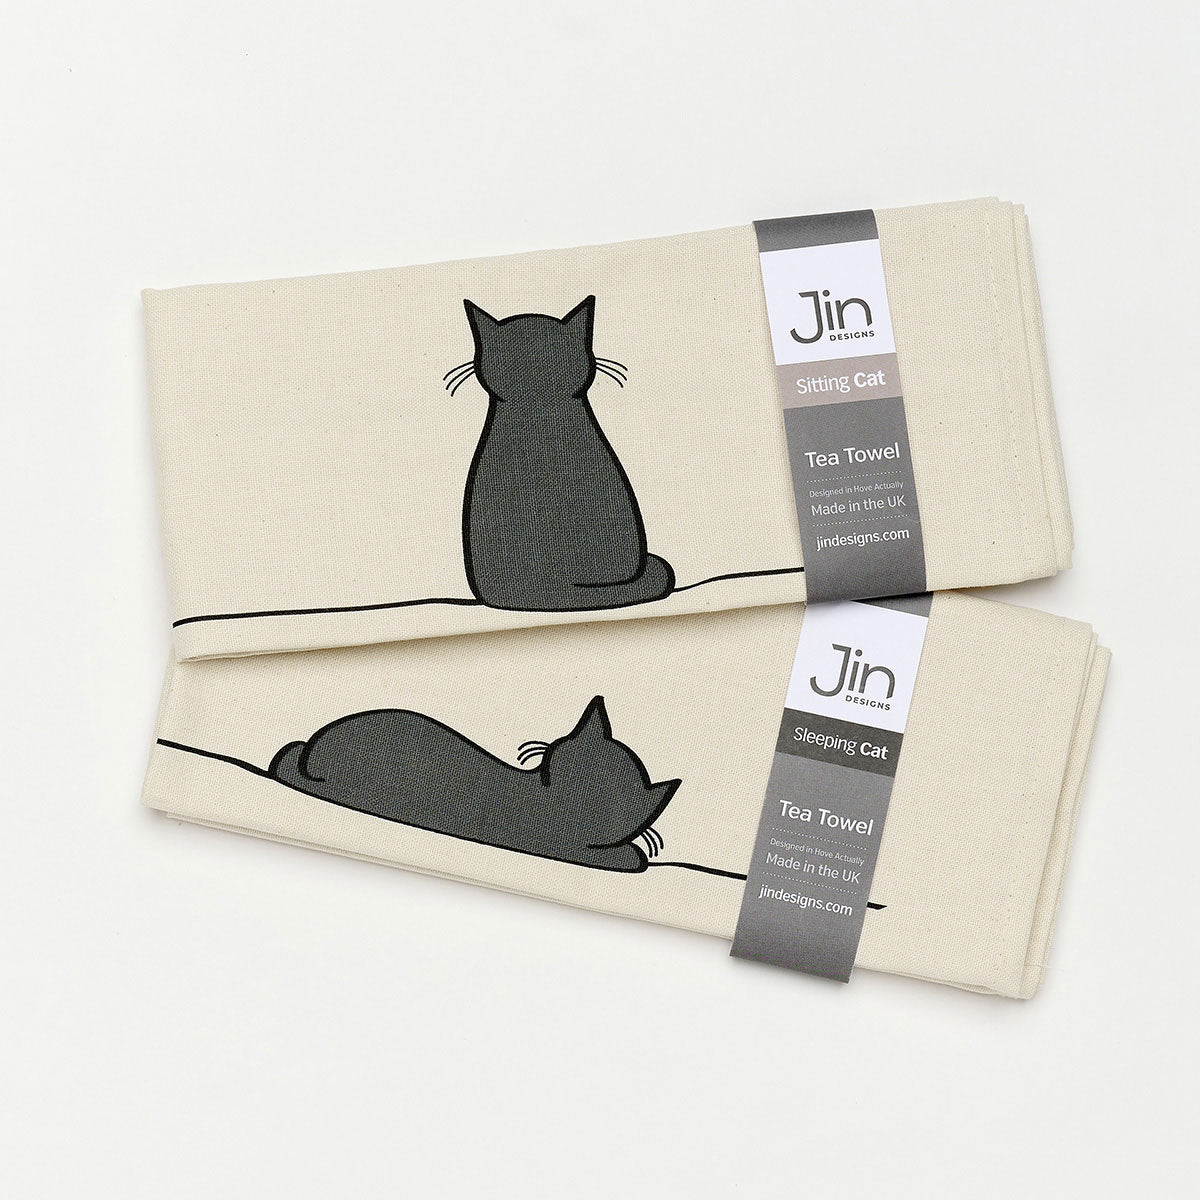 Sitting Cat and Sleeping Cat Tea Towels, Set of Two